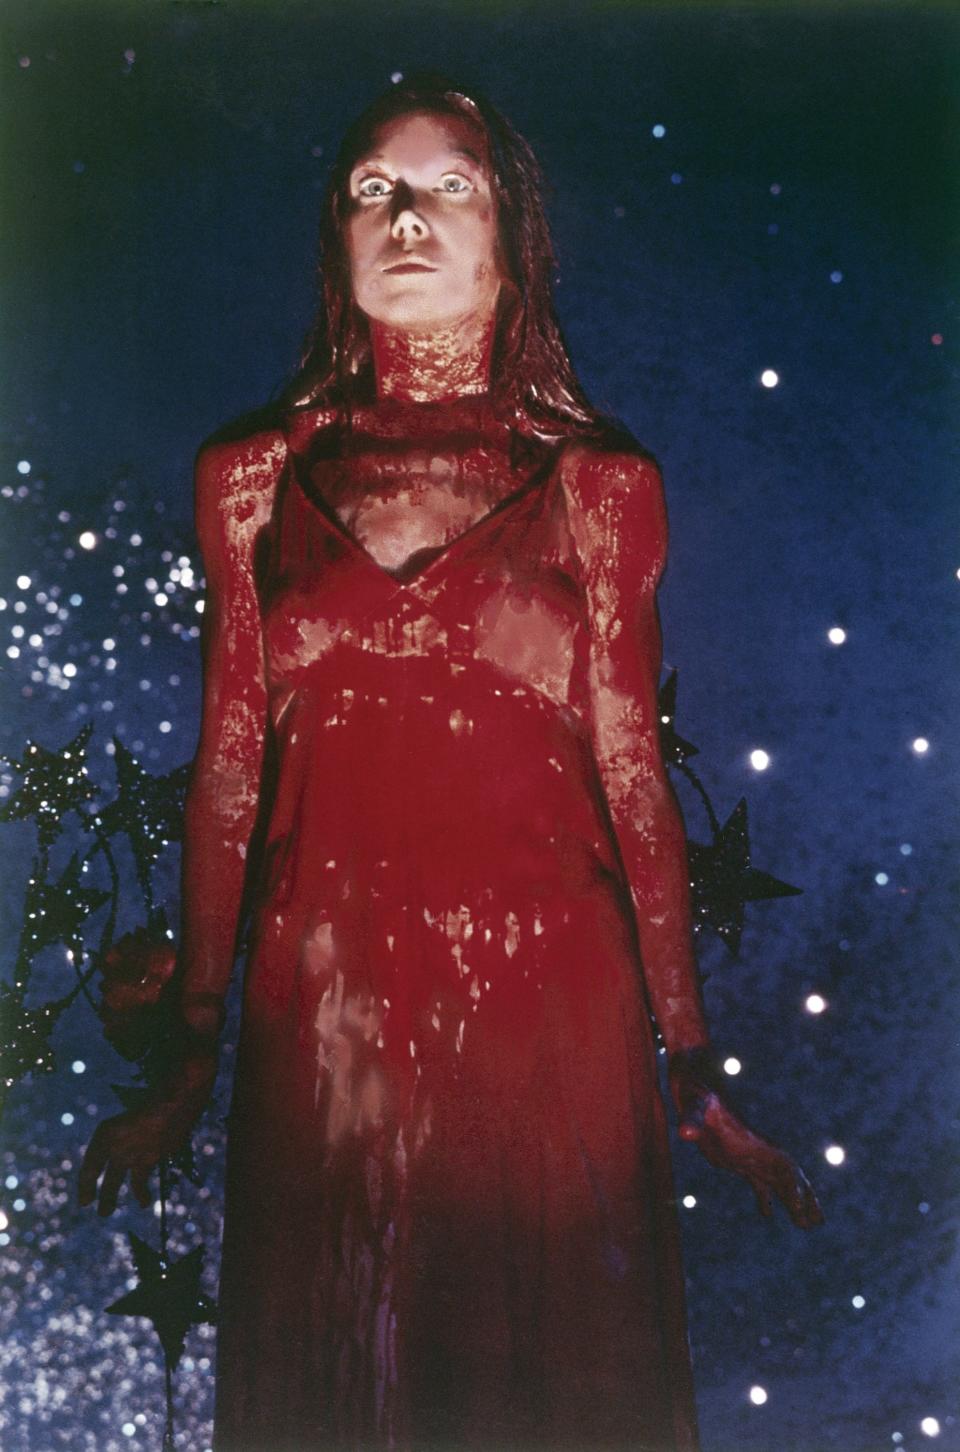 Carrie covered in blood